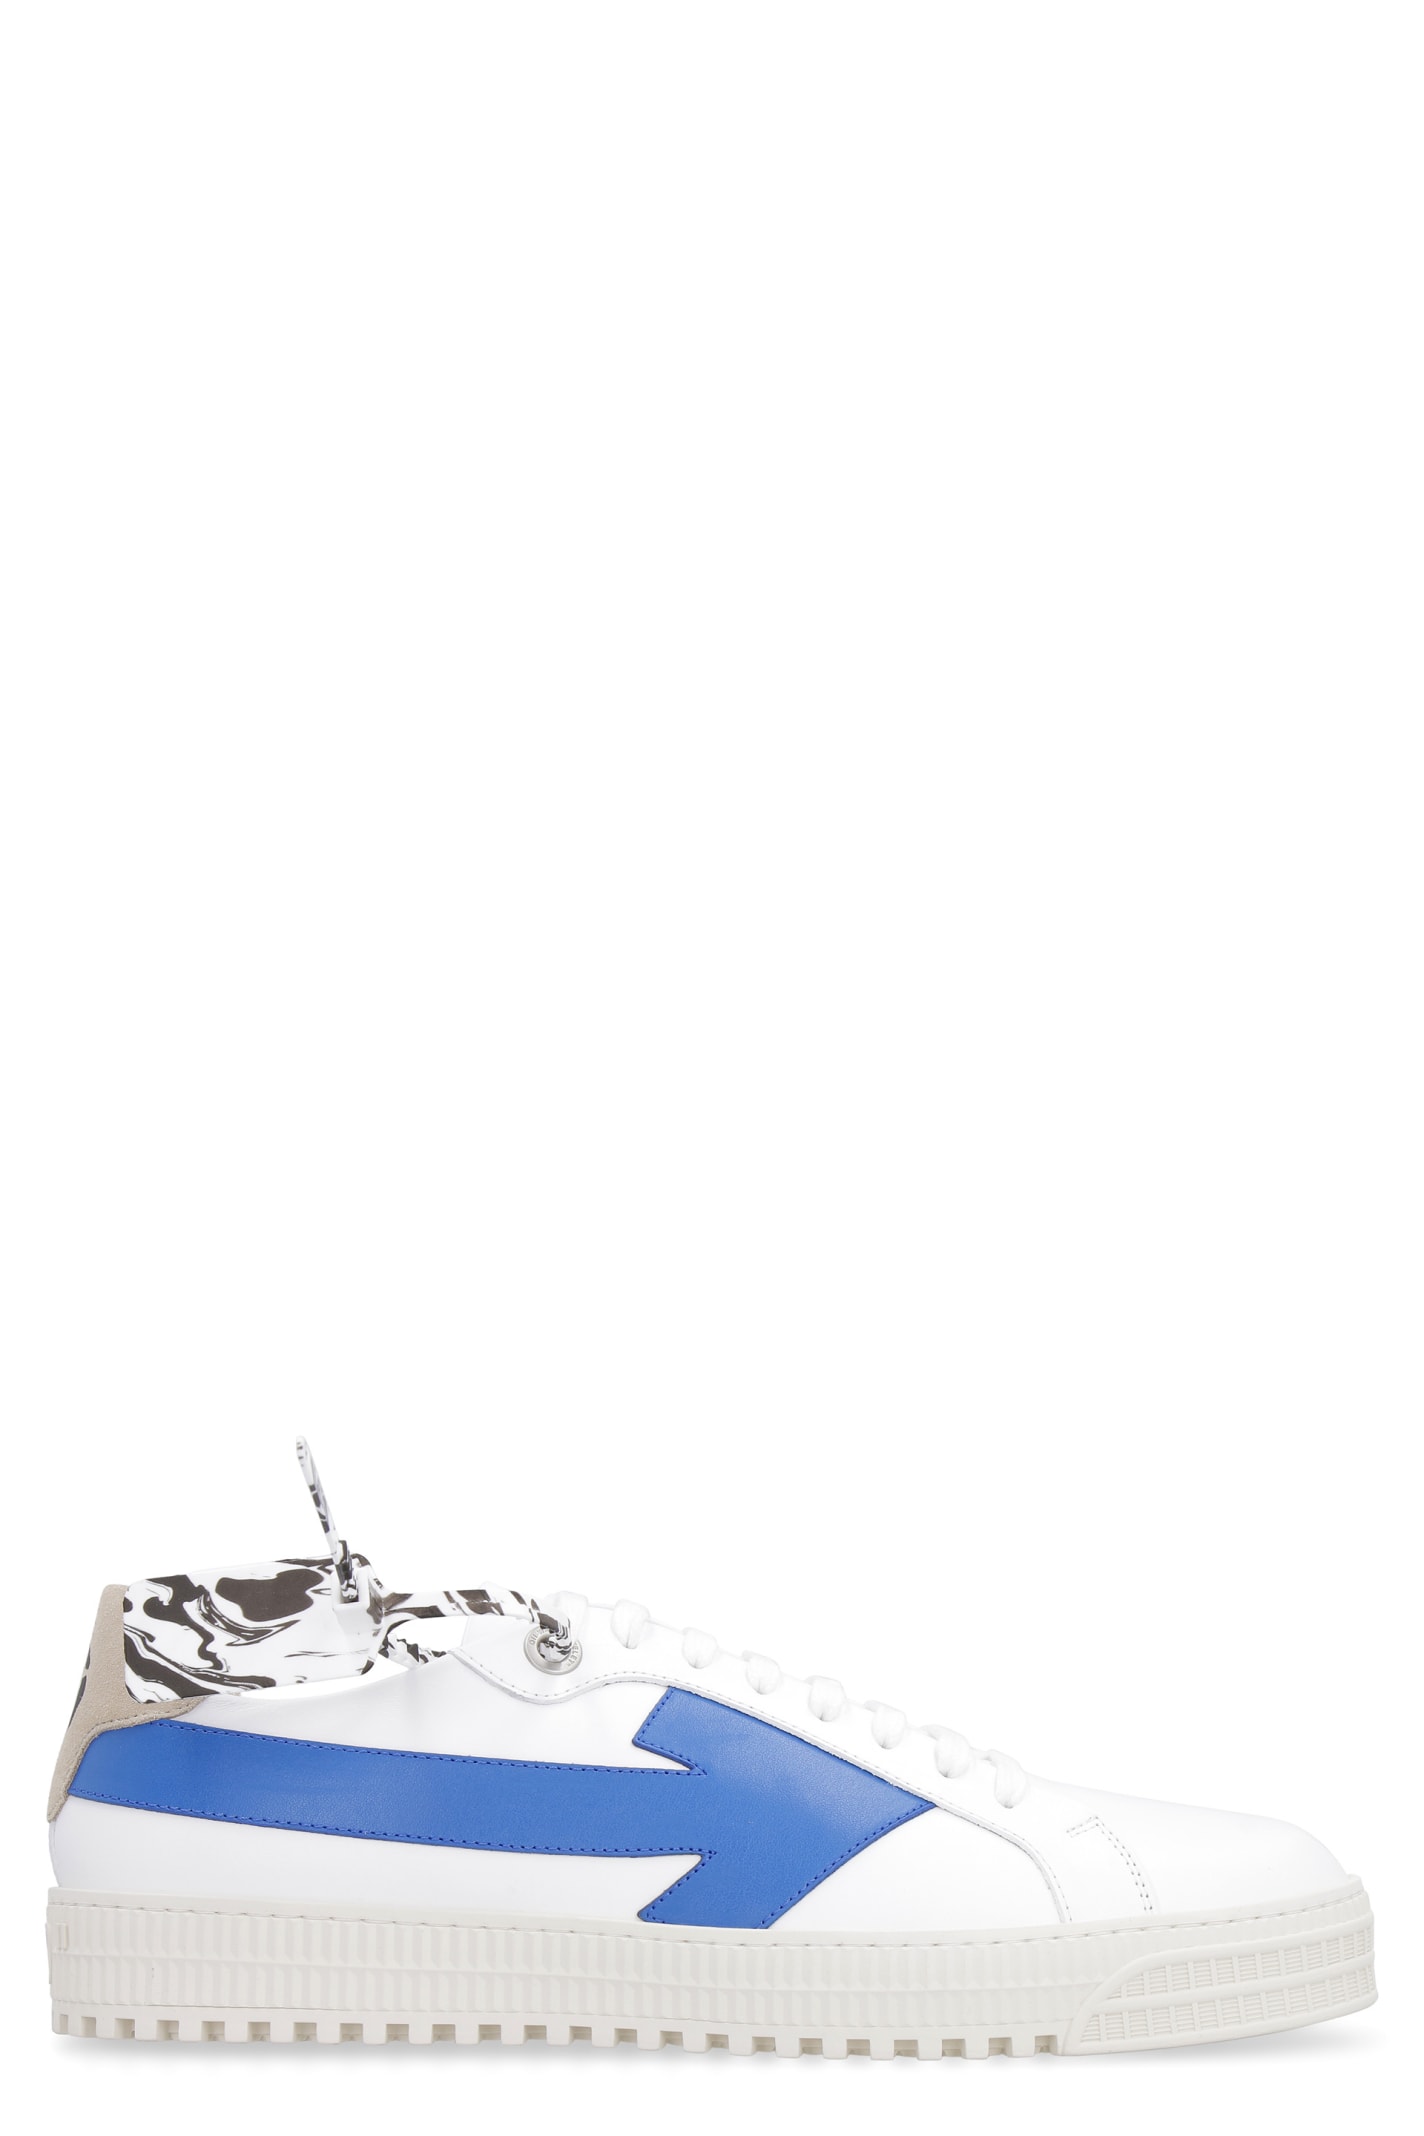 OFF-WHITE ARROW LEATHER SNEAKERS,11767369